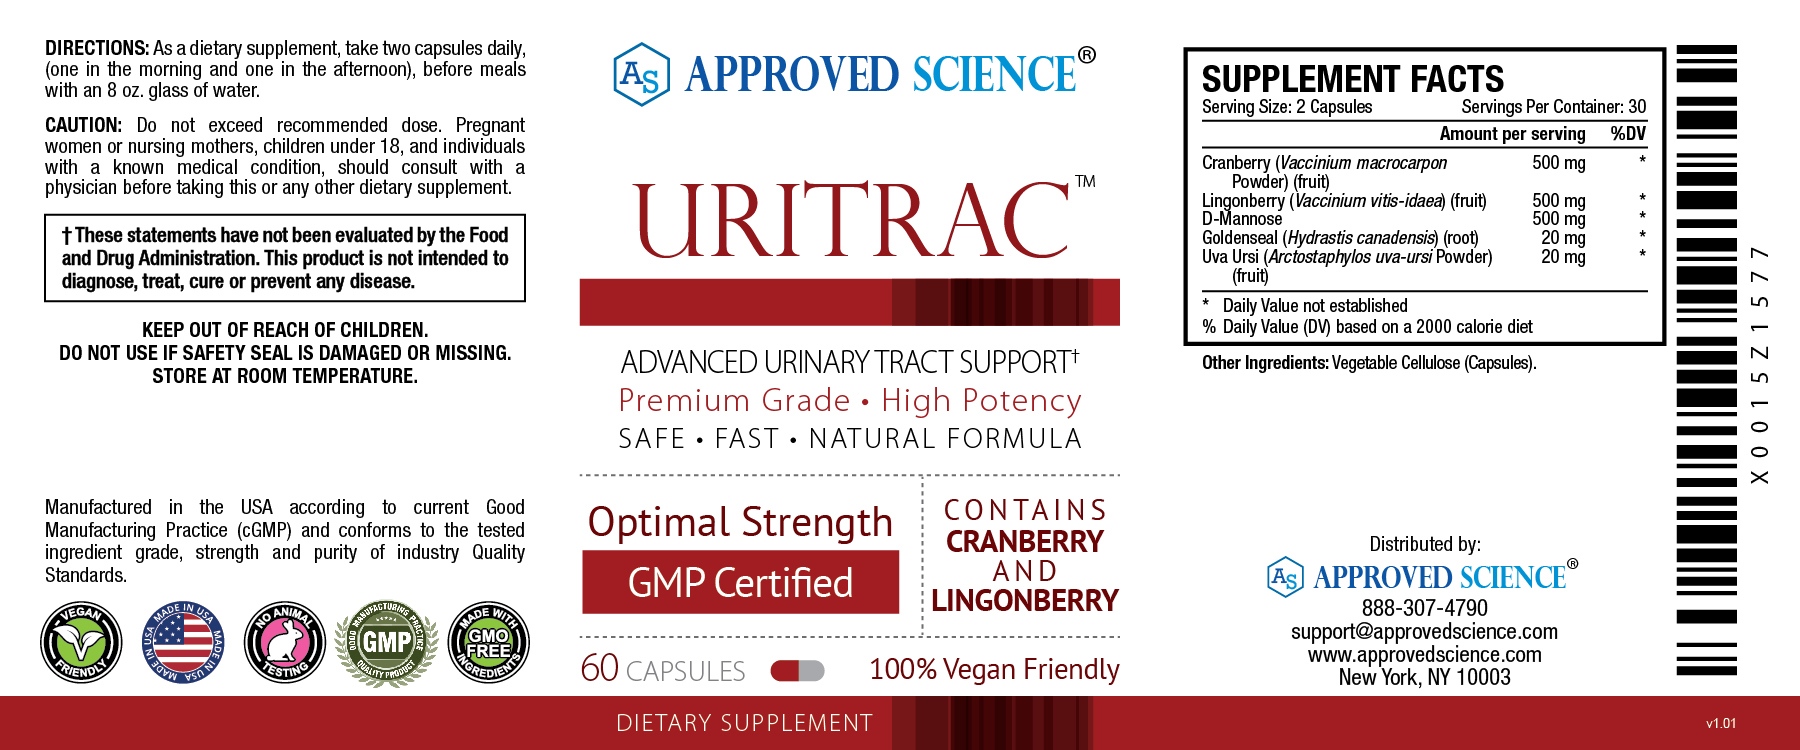 Uritrac™ Supplement Facts